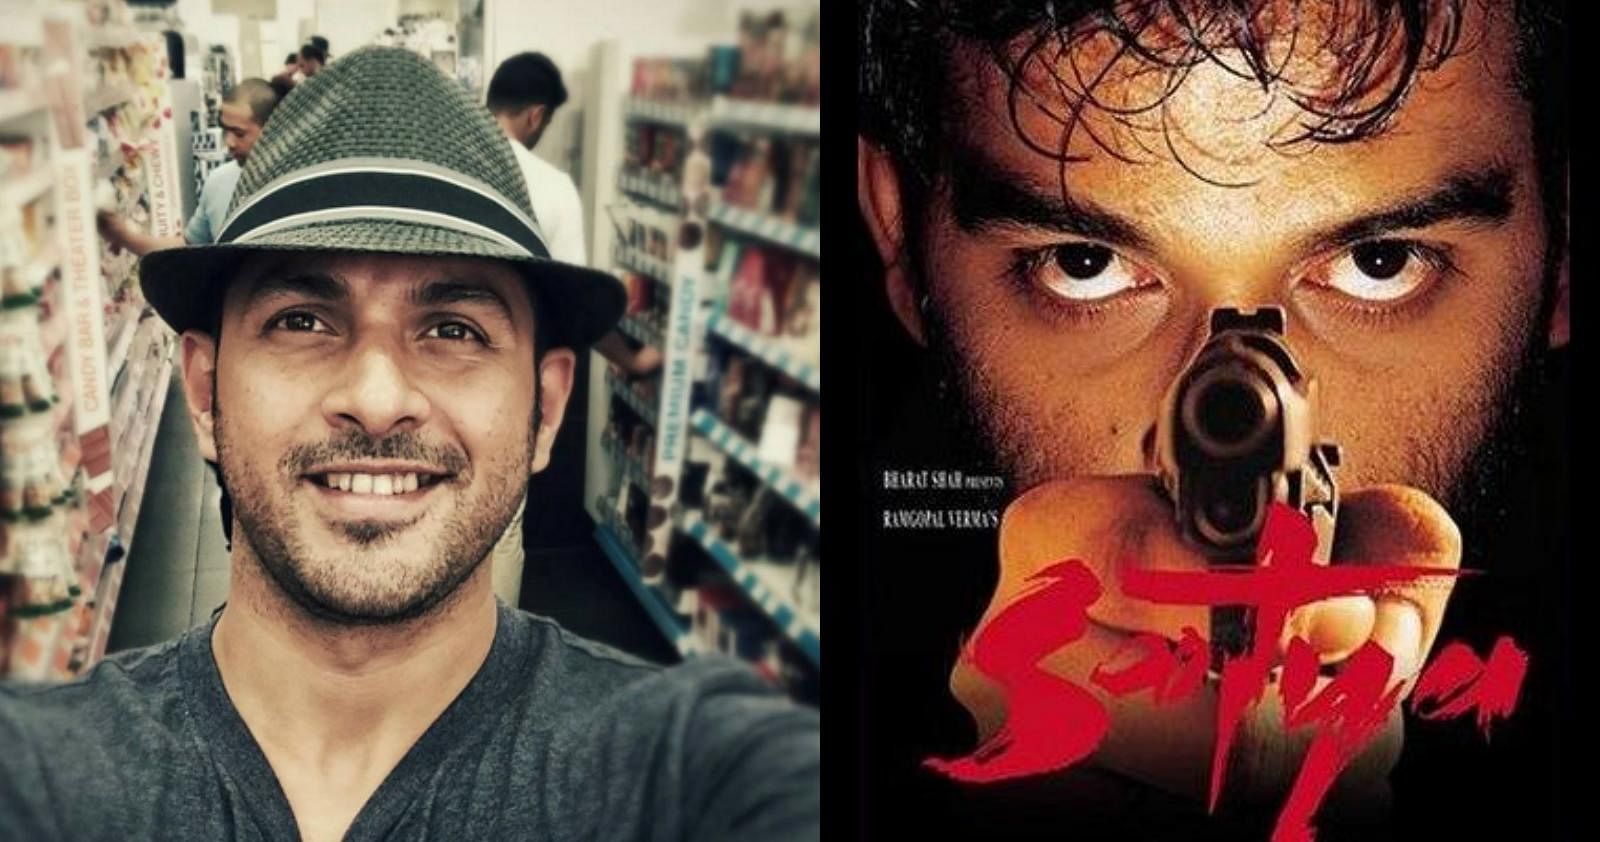 Apurva Asrani hopes he’ll get another chance to work with Ram Gopal Varma